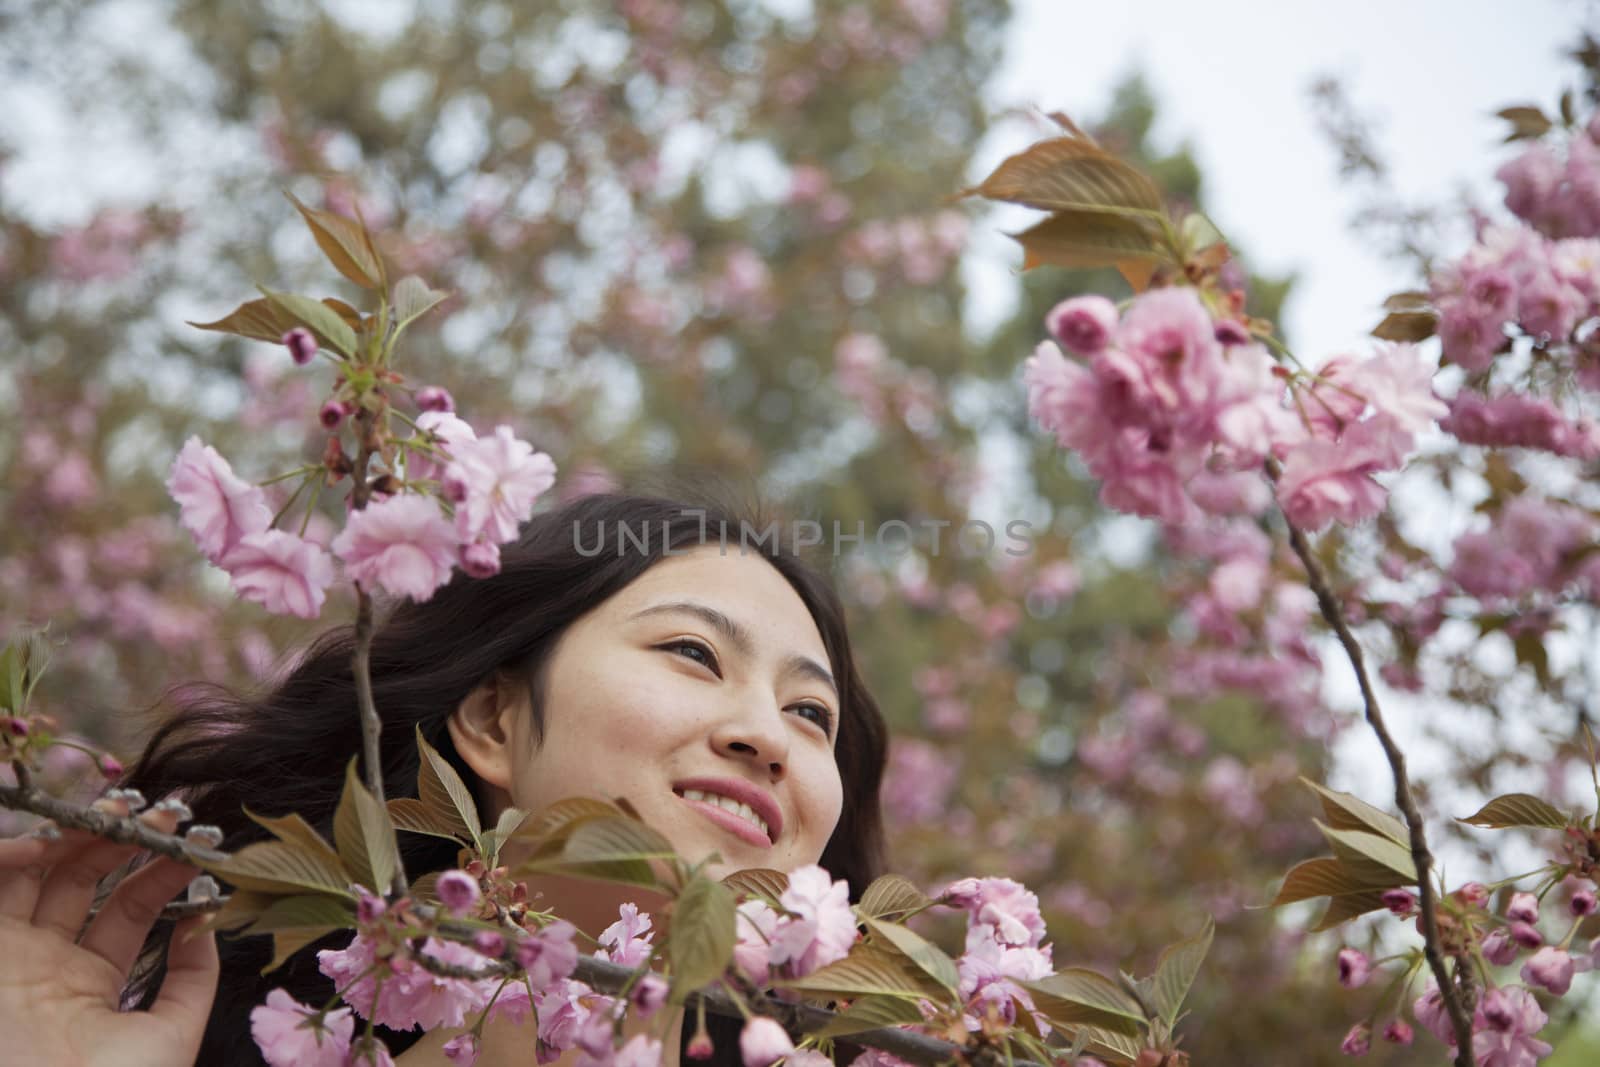 Portrait of smiling and serene young woman by beautiful pink blossoms, in the park in springtime